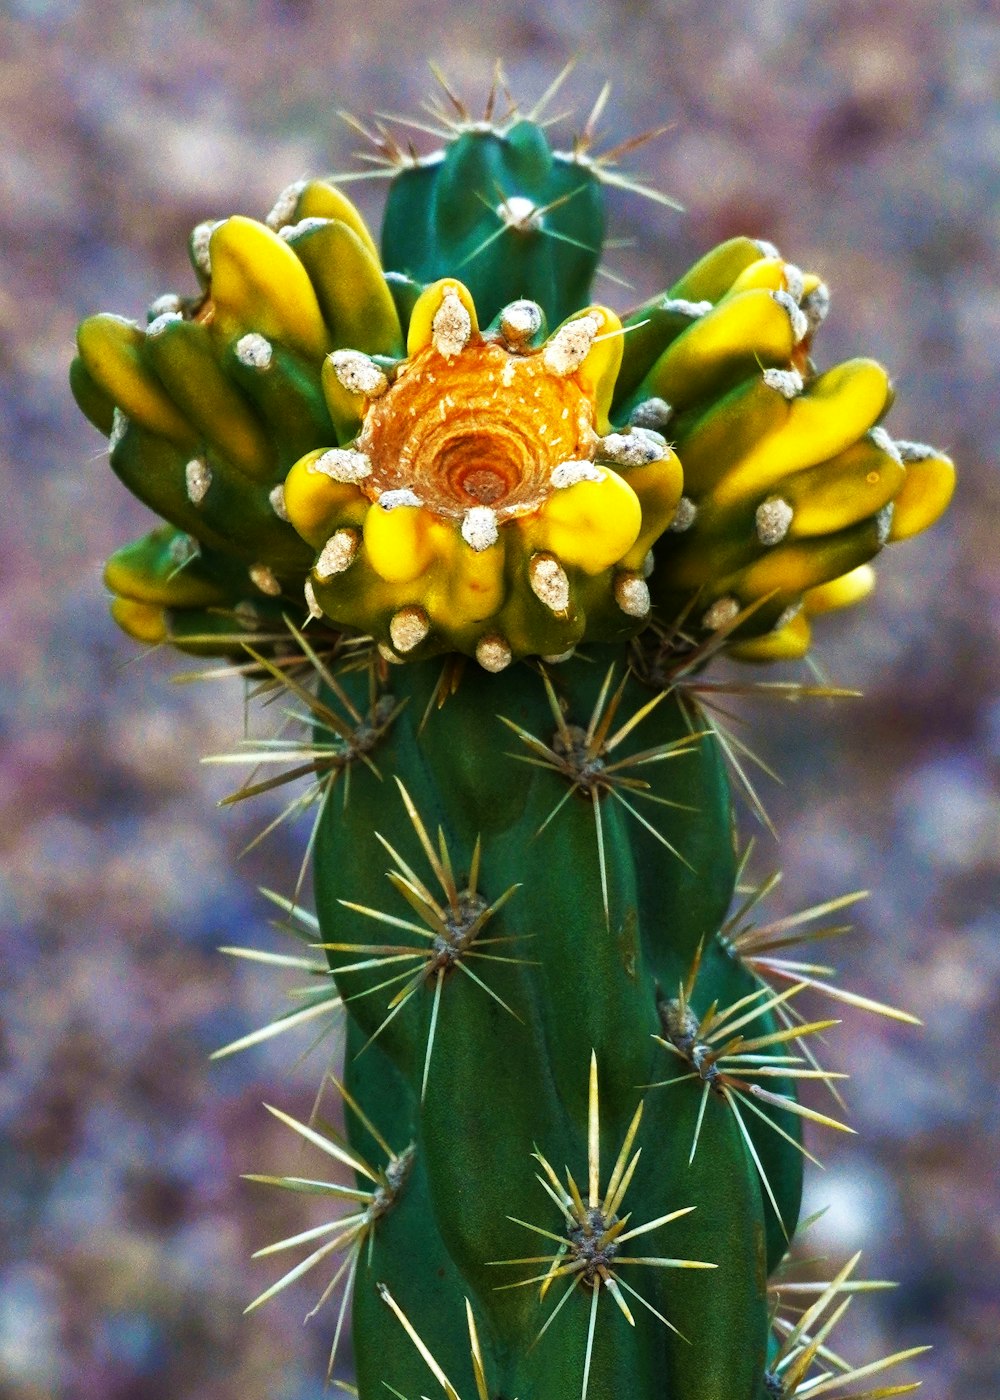 a close up of a green cactus with yellow flowers